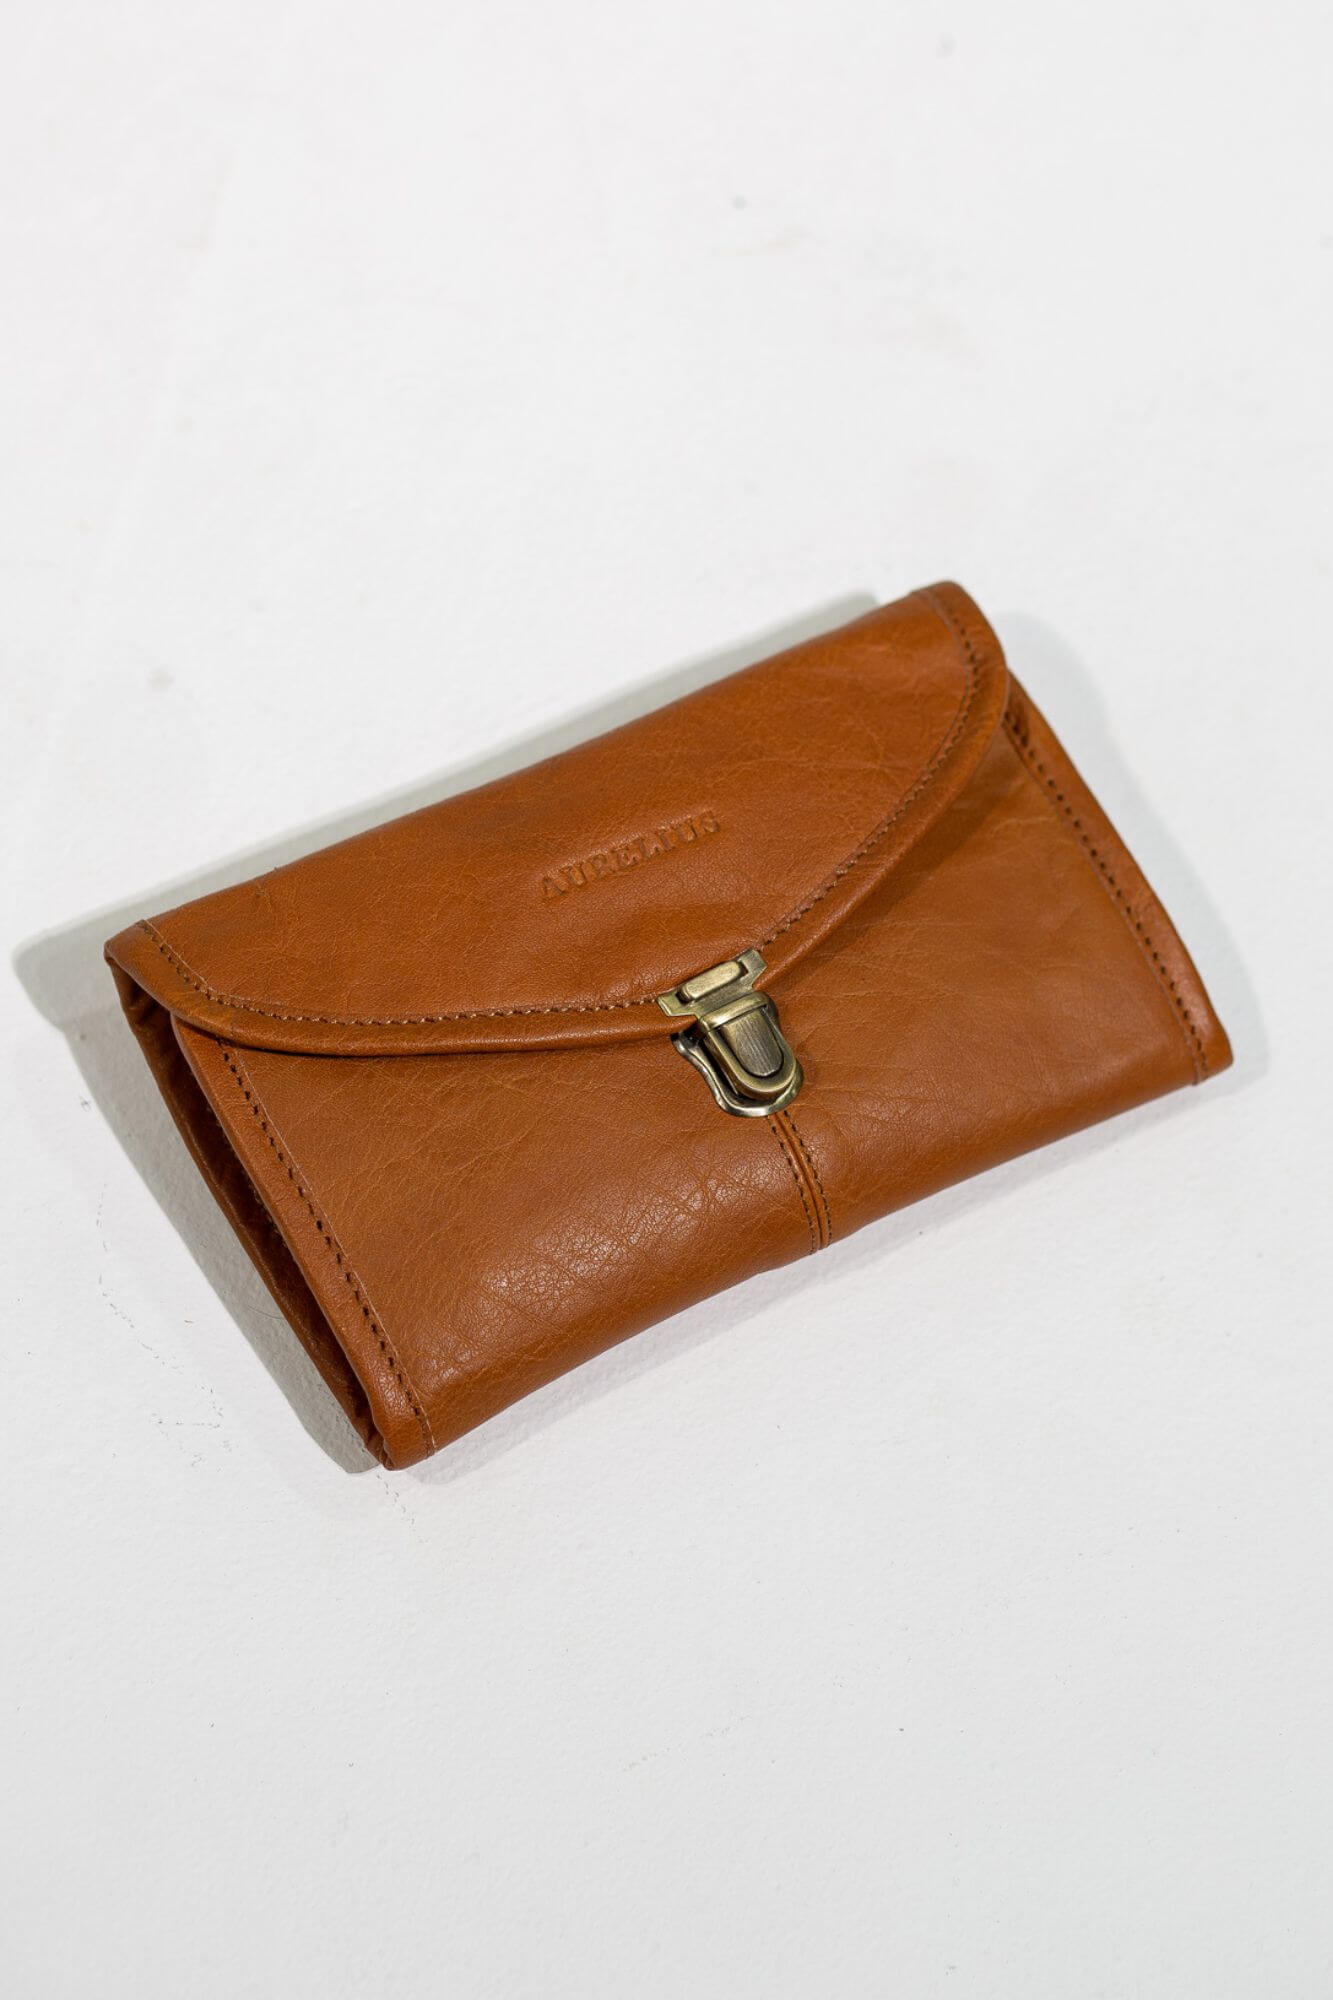 Aurelius Leather Leather Bag Tan Leather Carter Everyday Tech Wallet